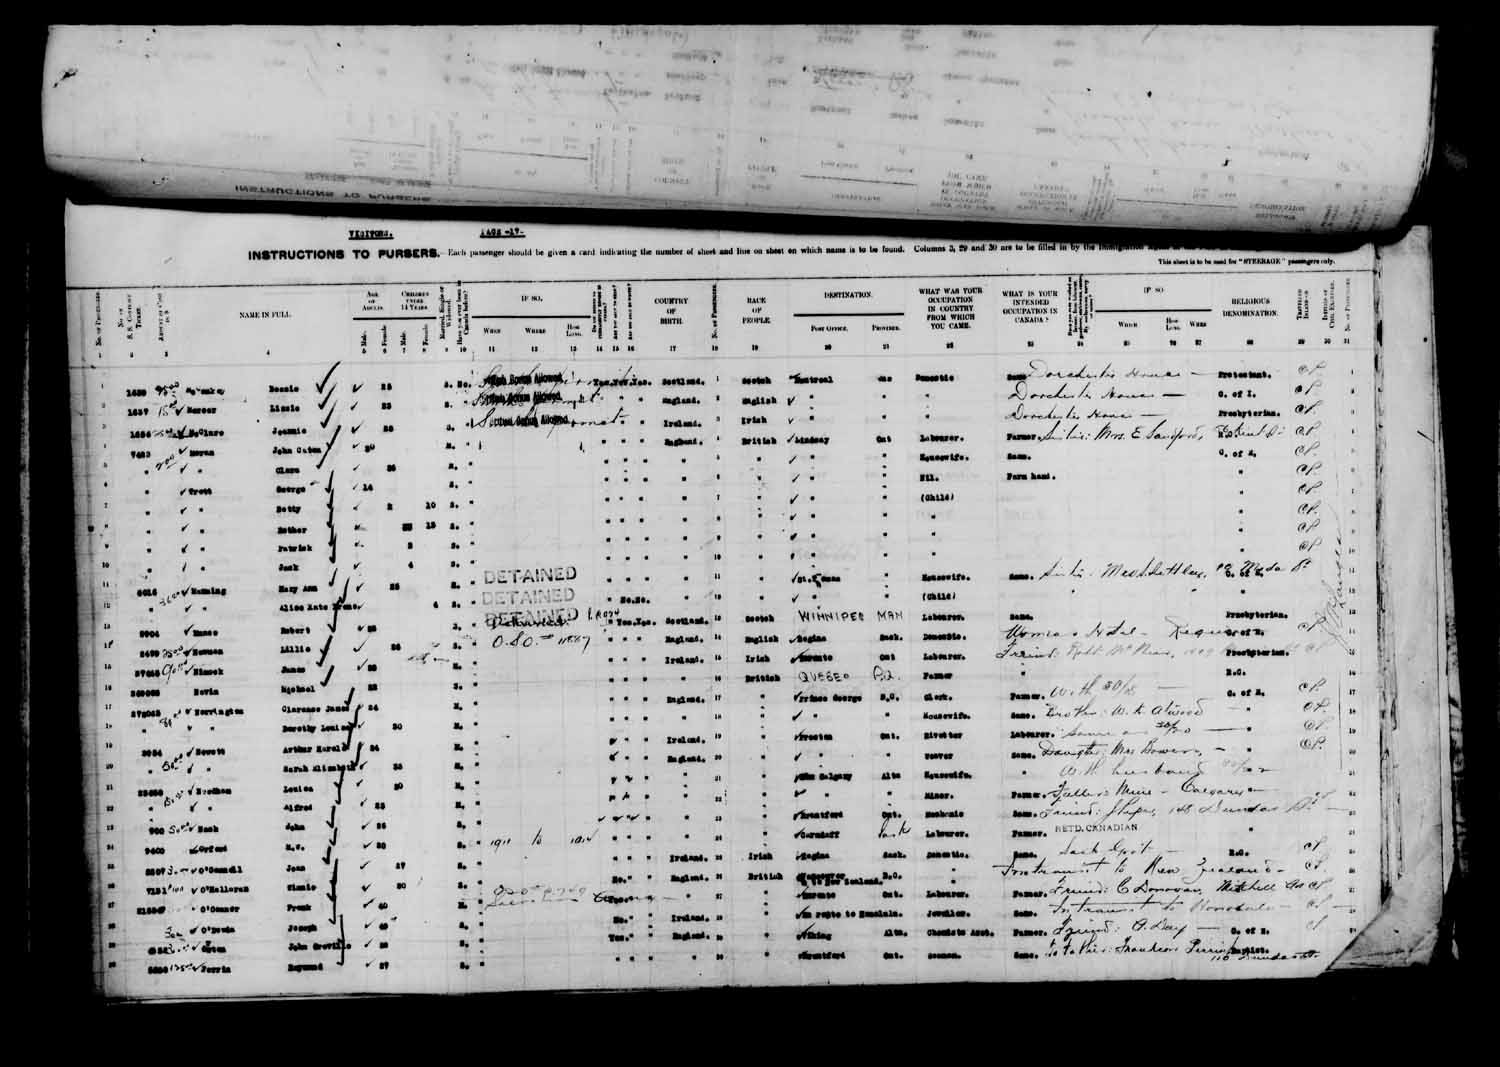 Digitized page of Passenger Lists for Image No.: e003610657